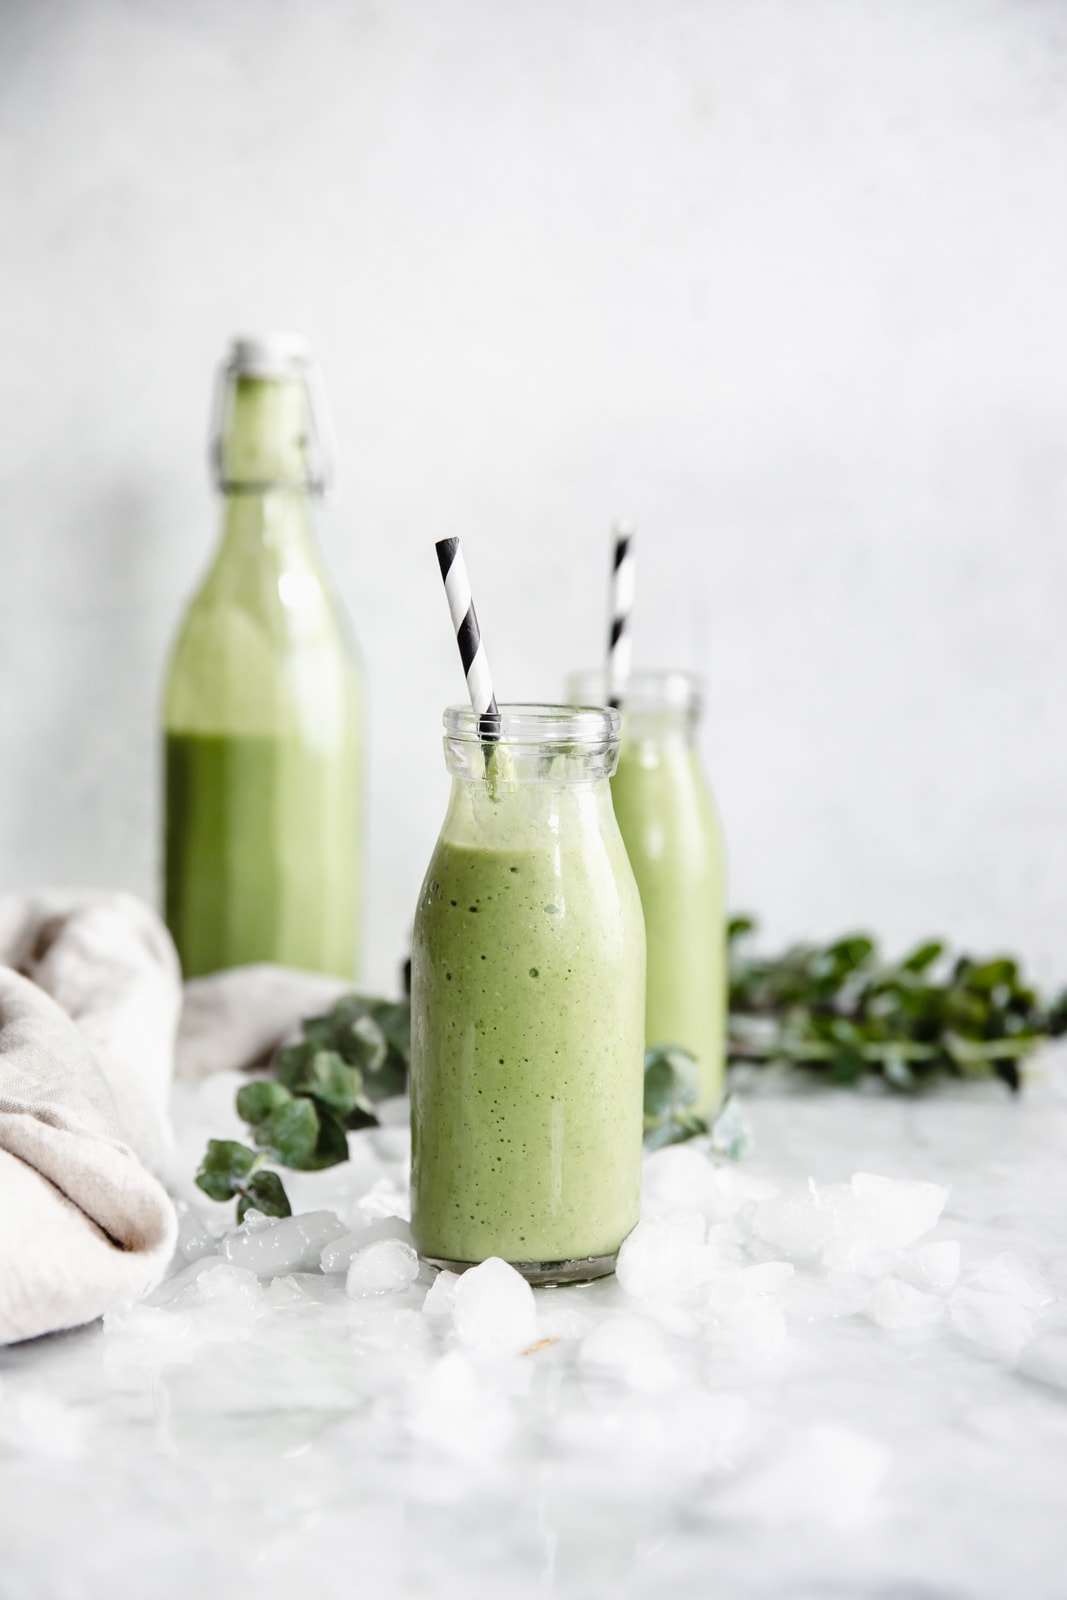 This easy green smoothie recipe tastes good AND is good for you. Start your morning off right with with this protein packed green smoothie.